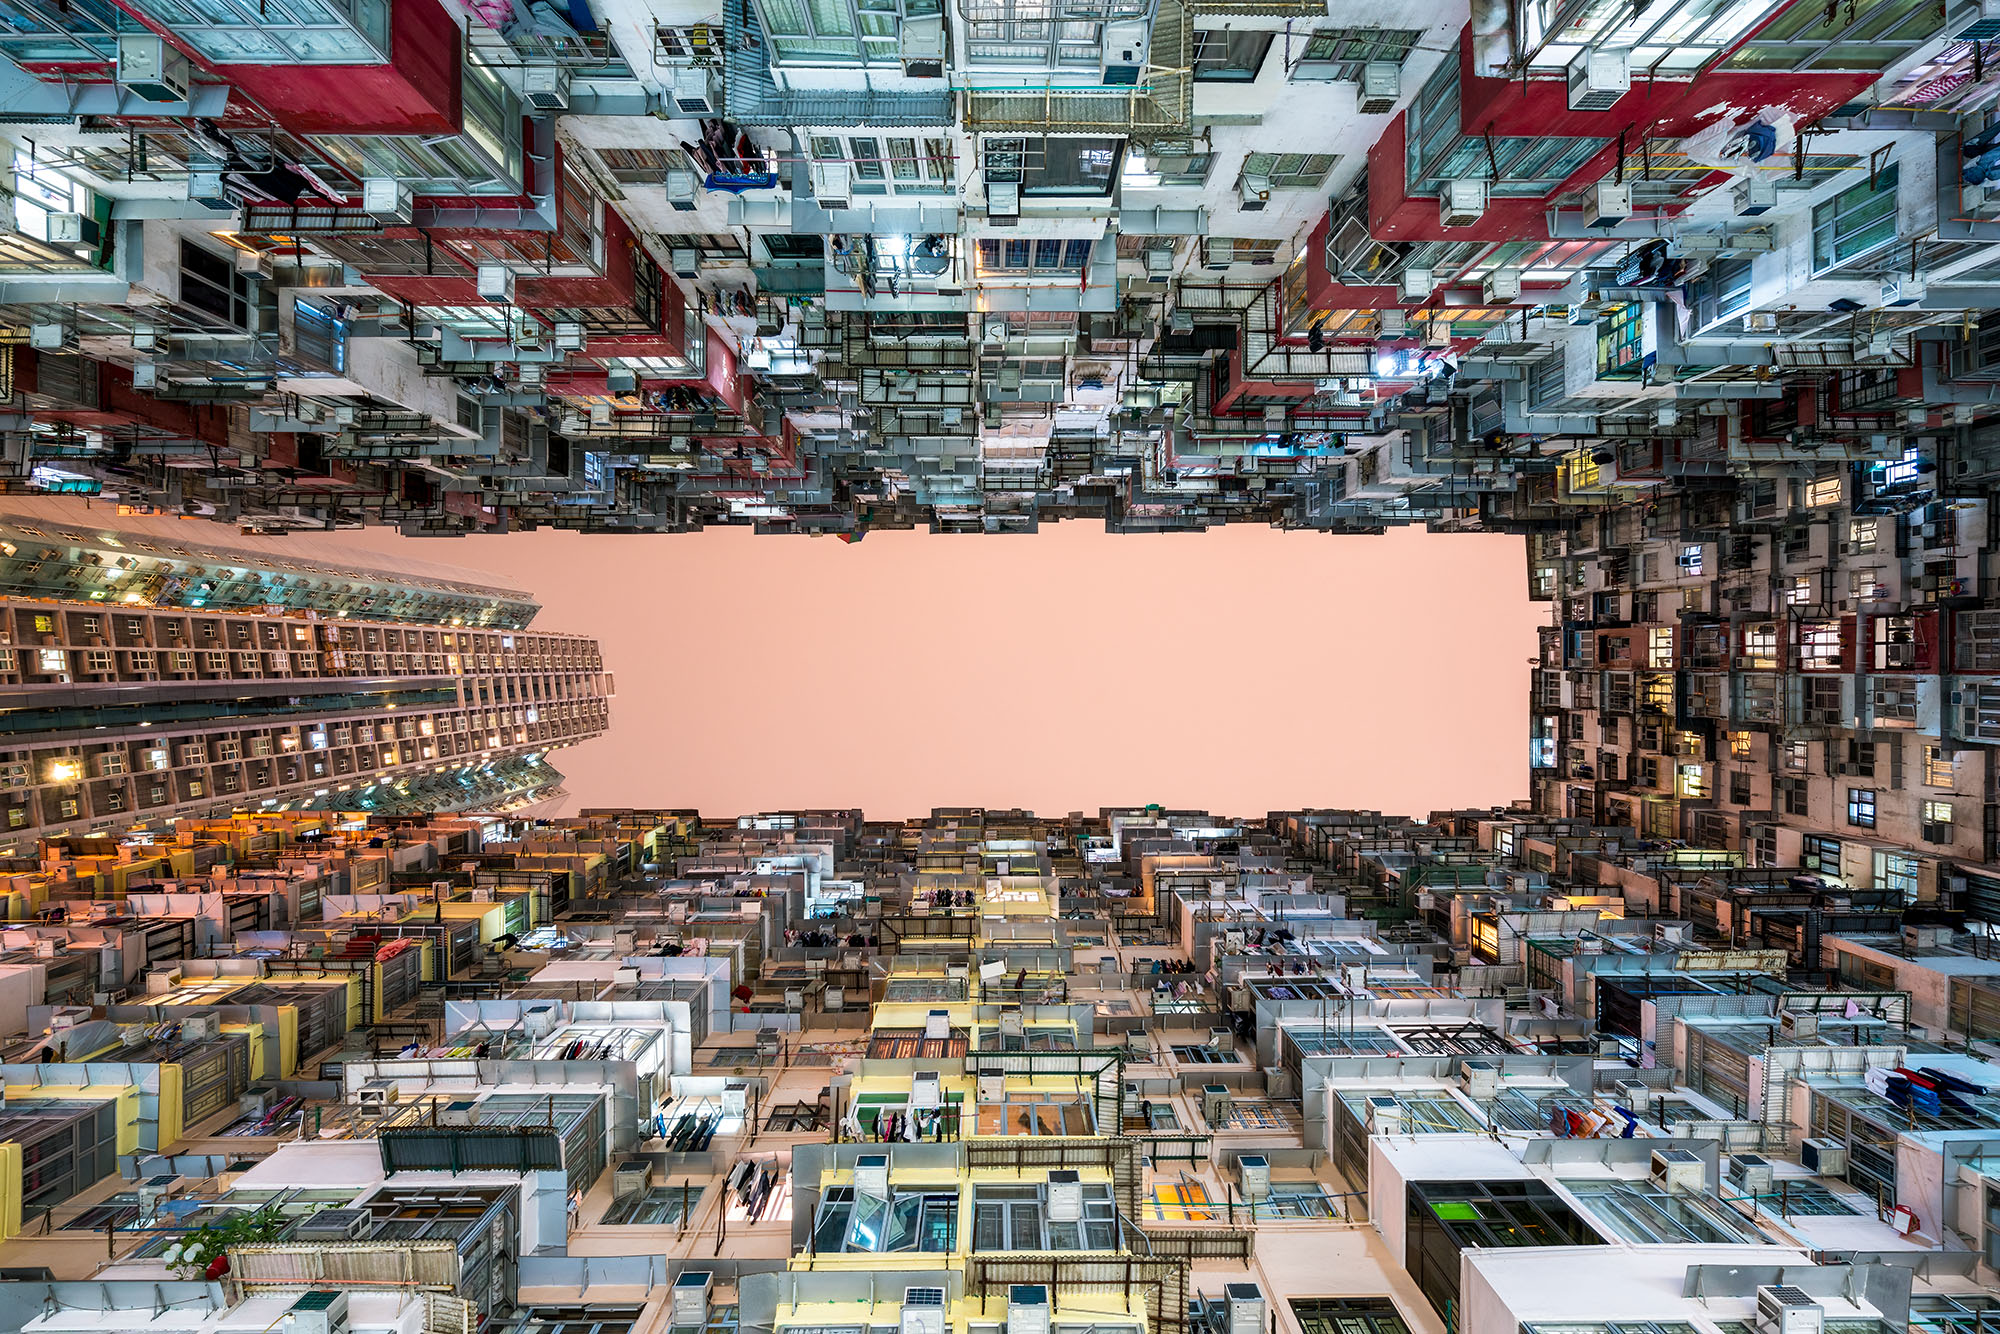 This striking image captures the Yick Cheong Building in Hong Kong against the backdrop of the night sky. This architectural...